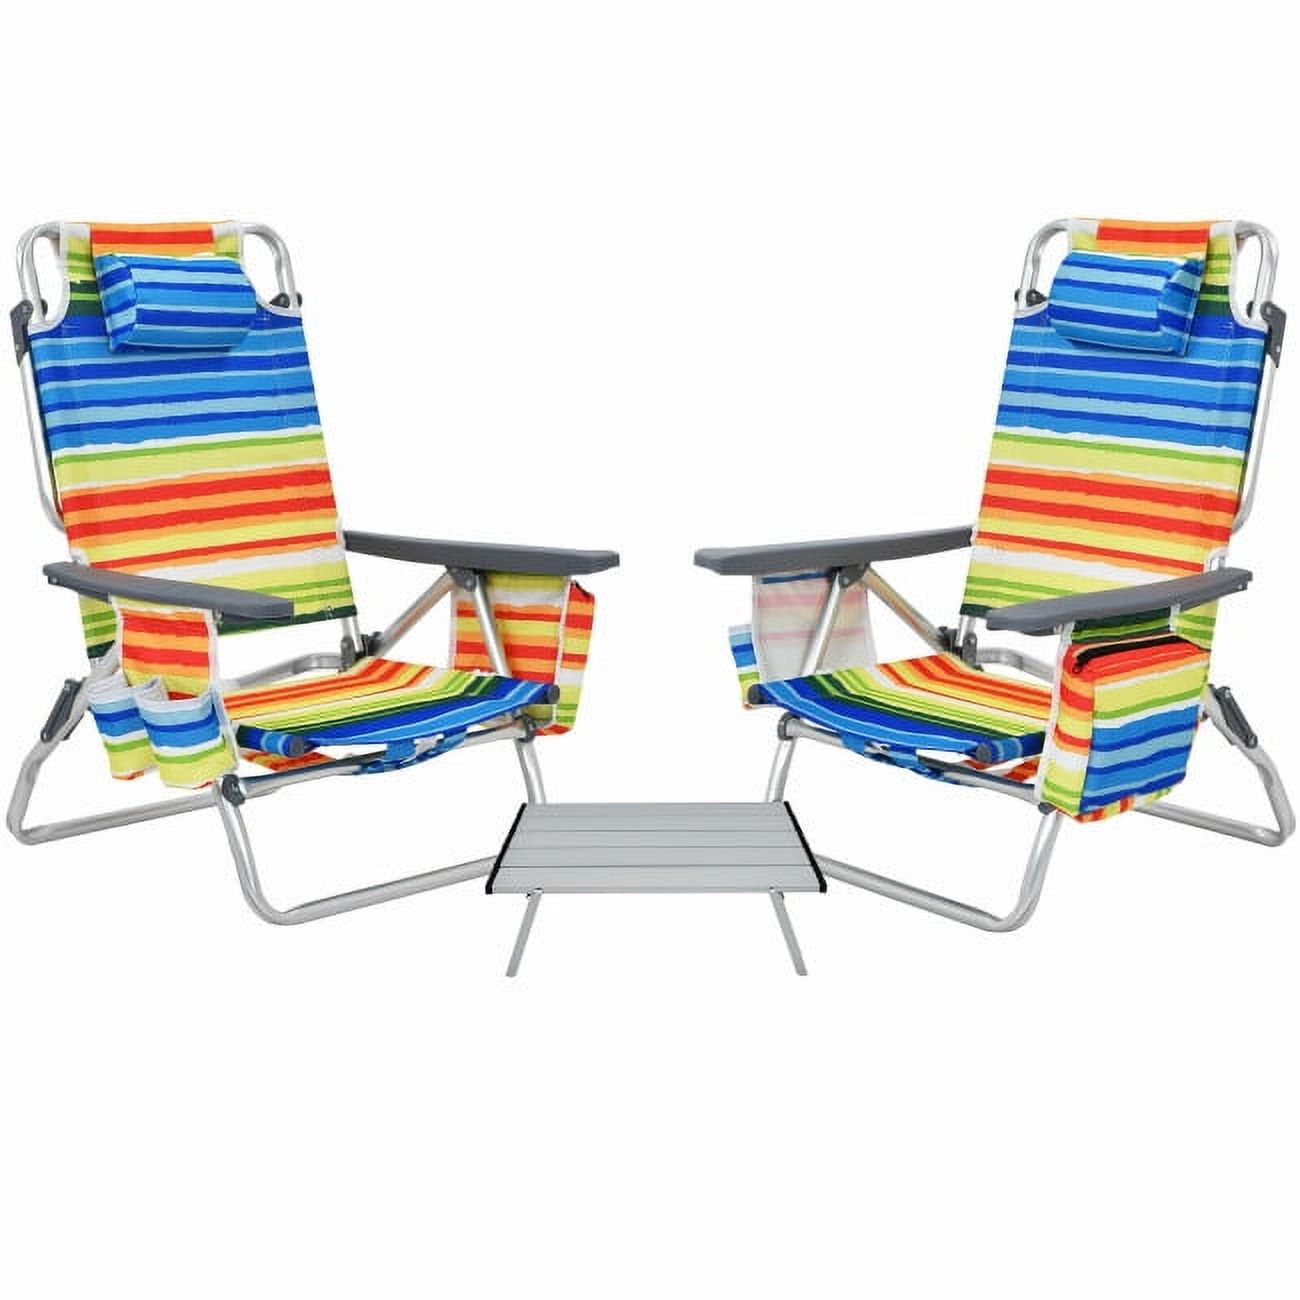 GIVIMO 2 Pack 5-Position Outdoor Folding Backpack Beach Table Chair Reclining Chair - image 1 of 10